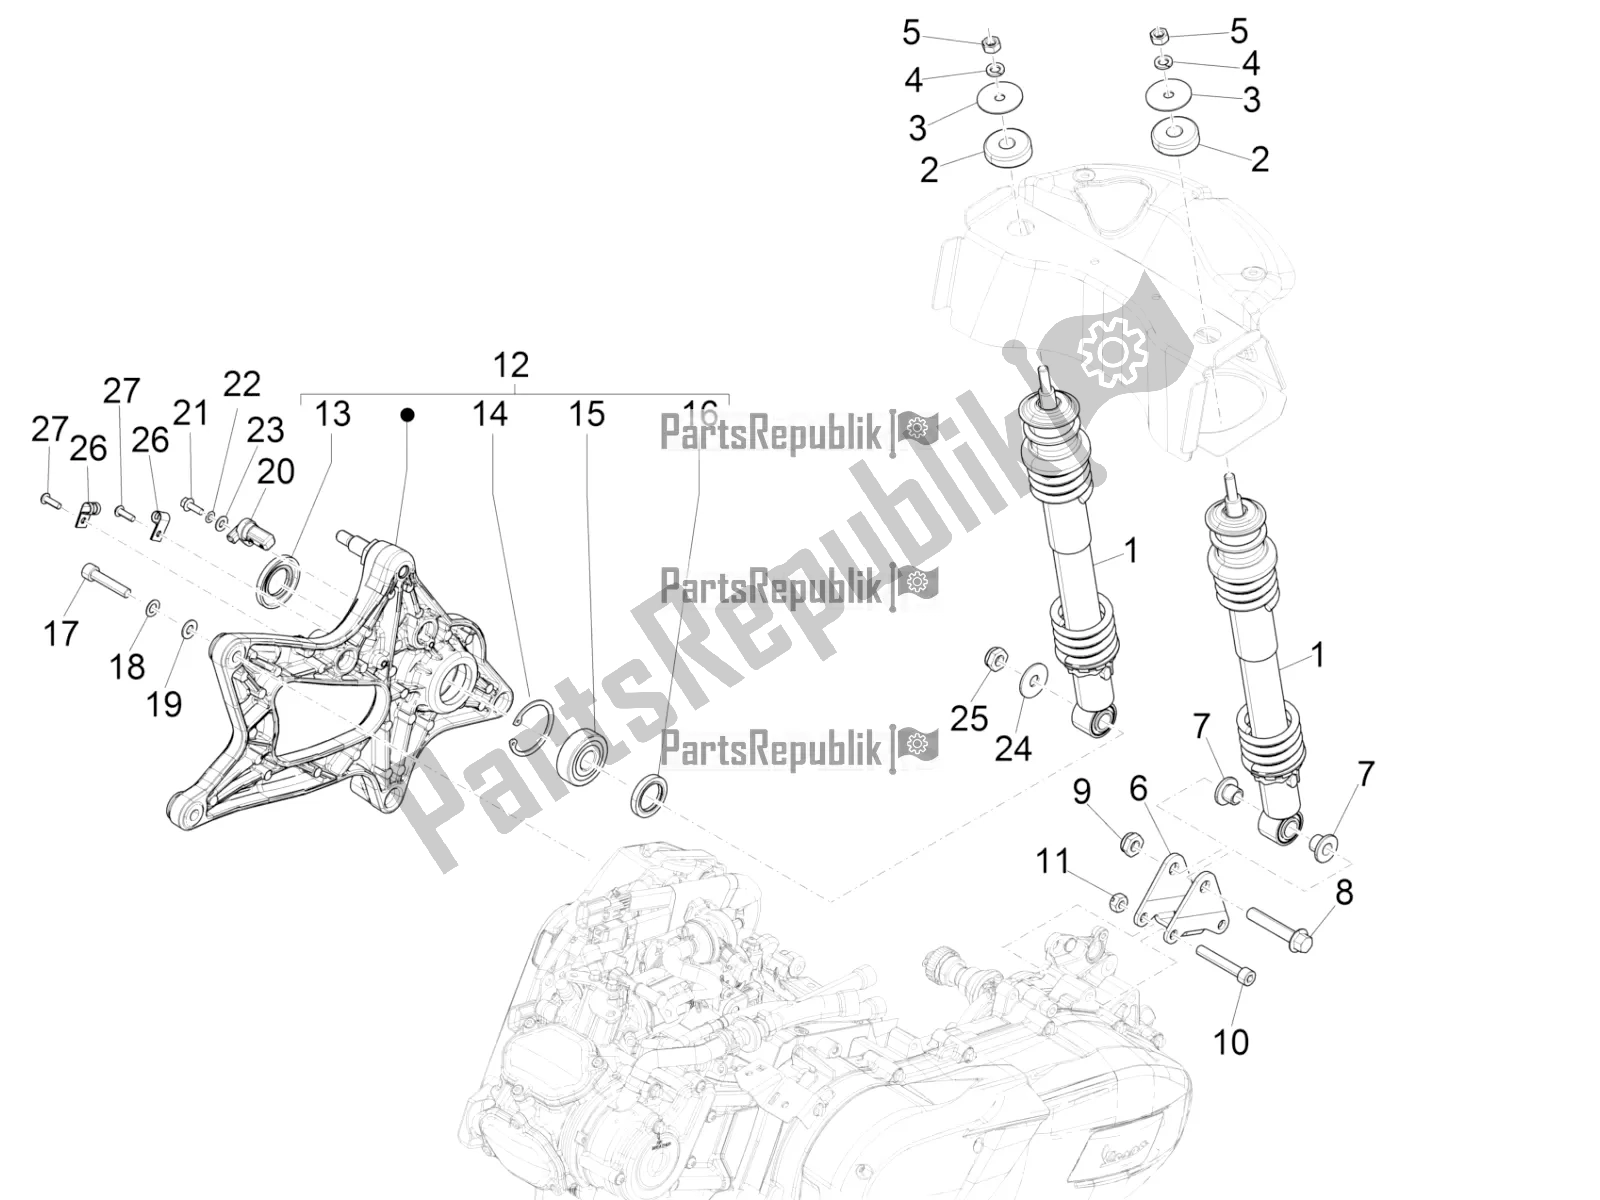 All parts for the Rear Suspension - Shock Absorber/s of the Vespa GTS 150 3V IE ABS 2018